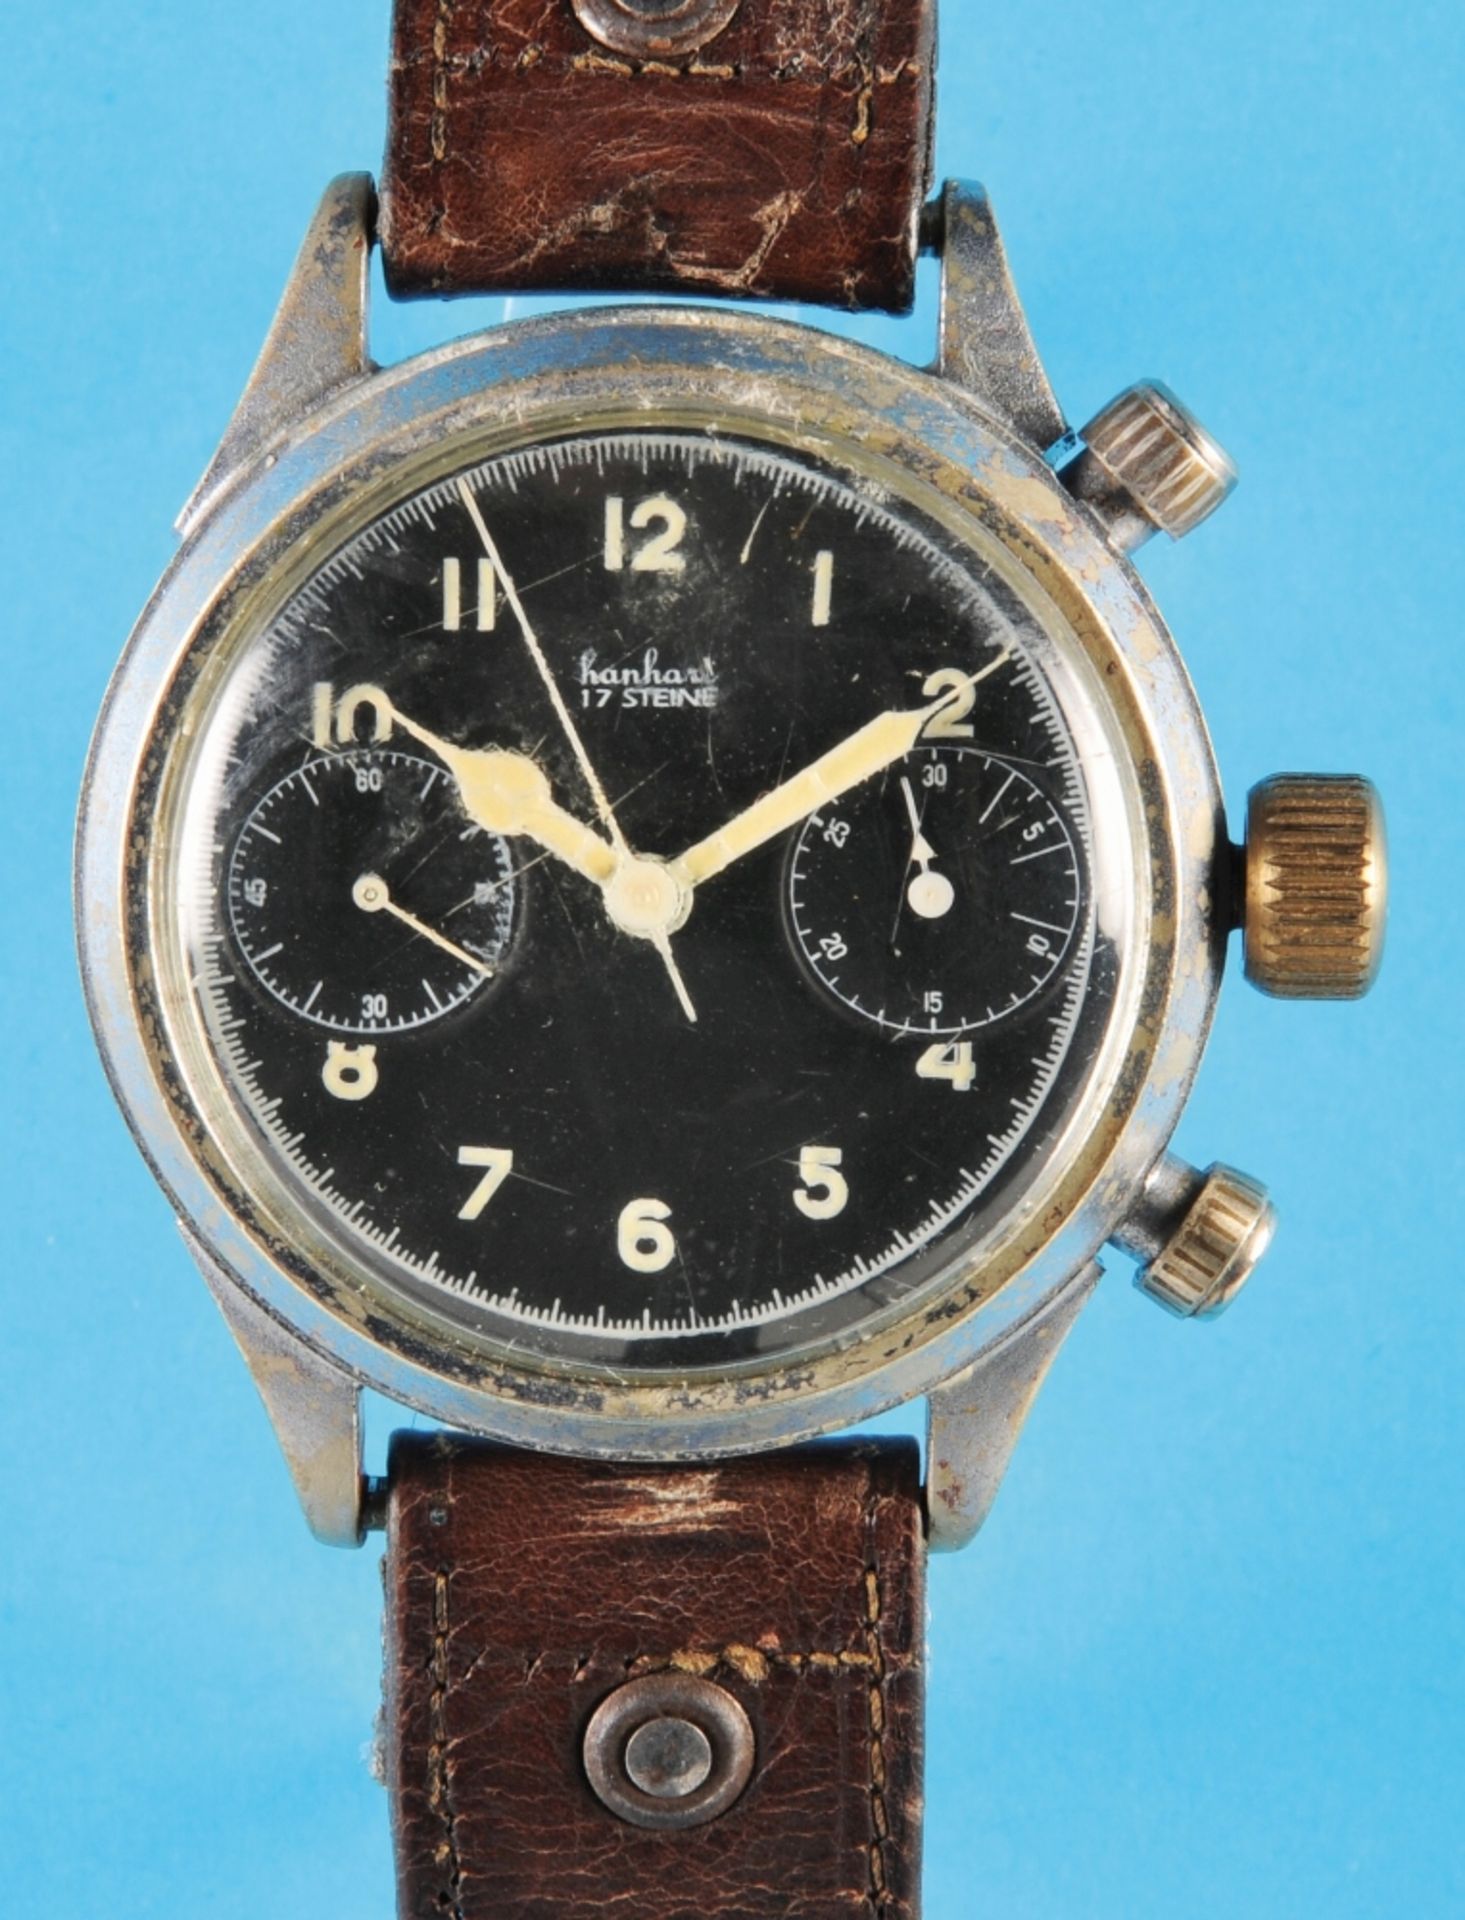 Hanhart pilot's wristwatch chronograph, WW2, 1940s, gray matted case (rubbed), with screw-down stain